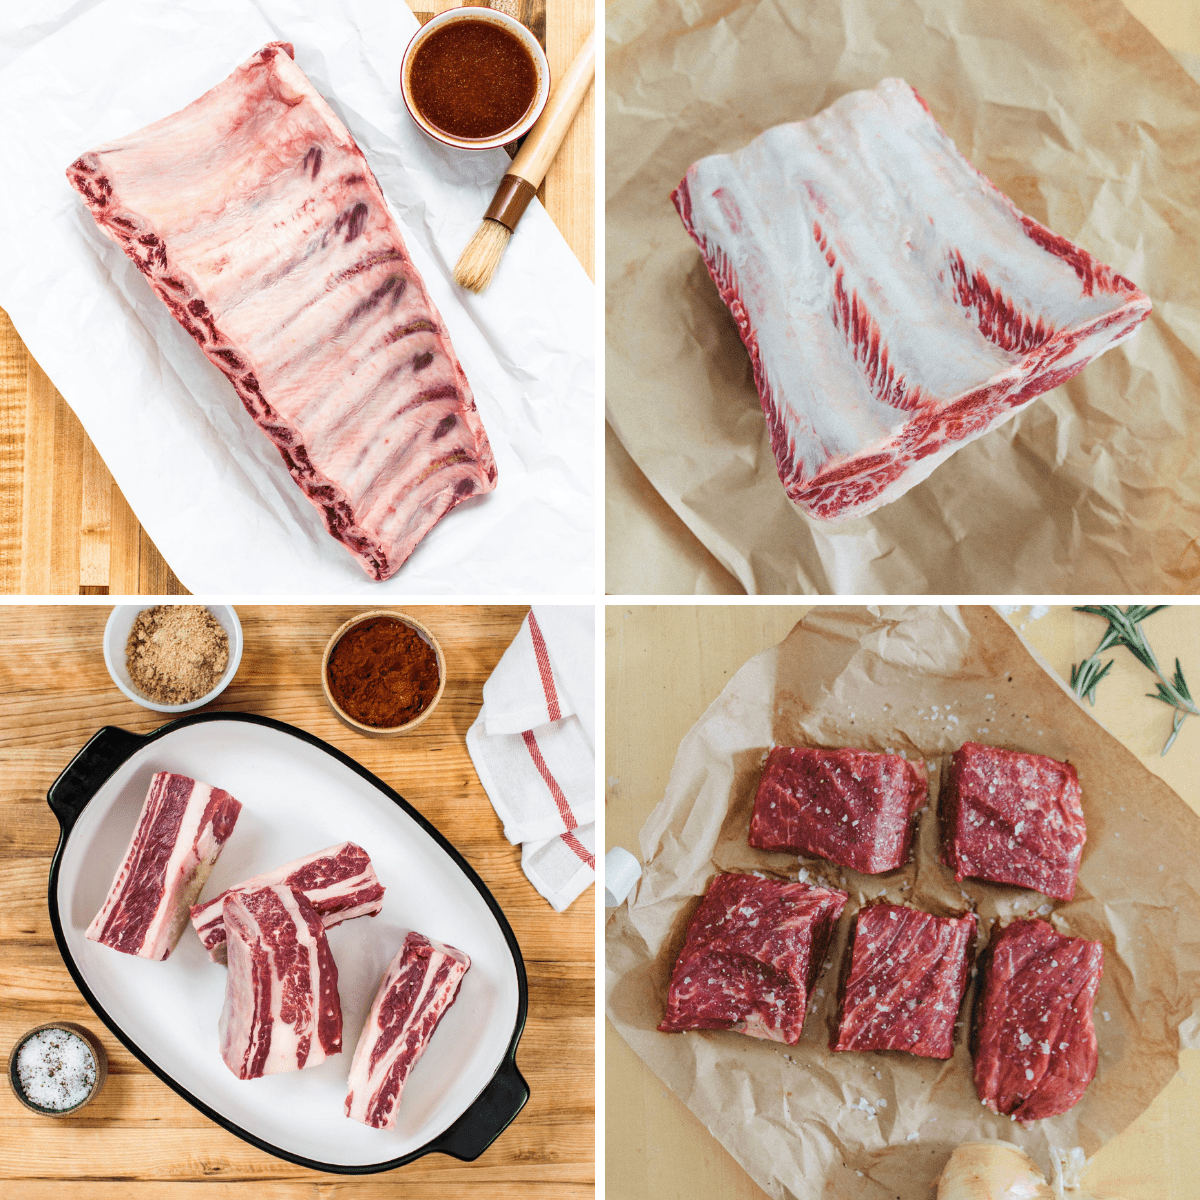 Four photo montage of 4 different types of beef ribs from Porter Road